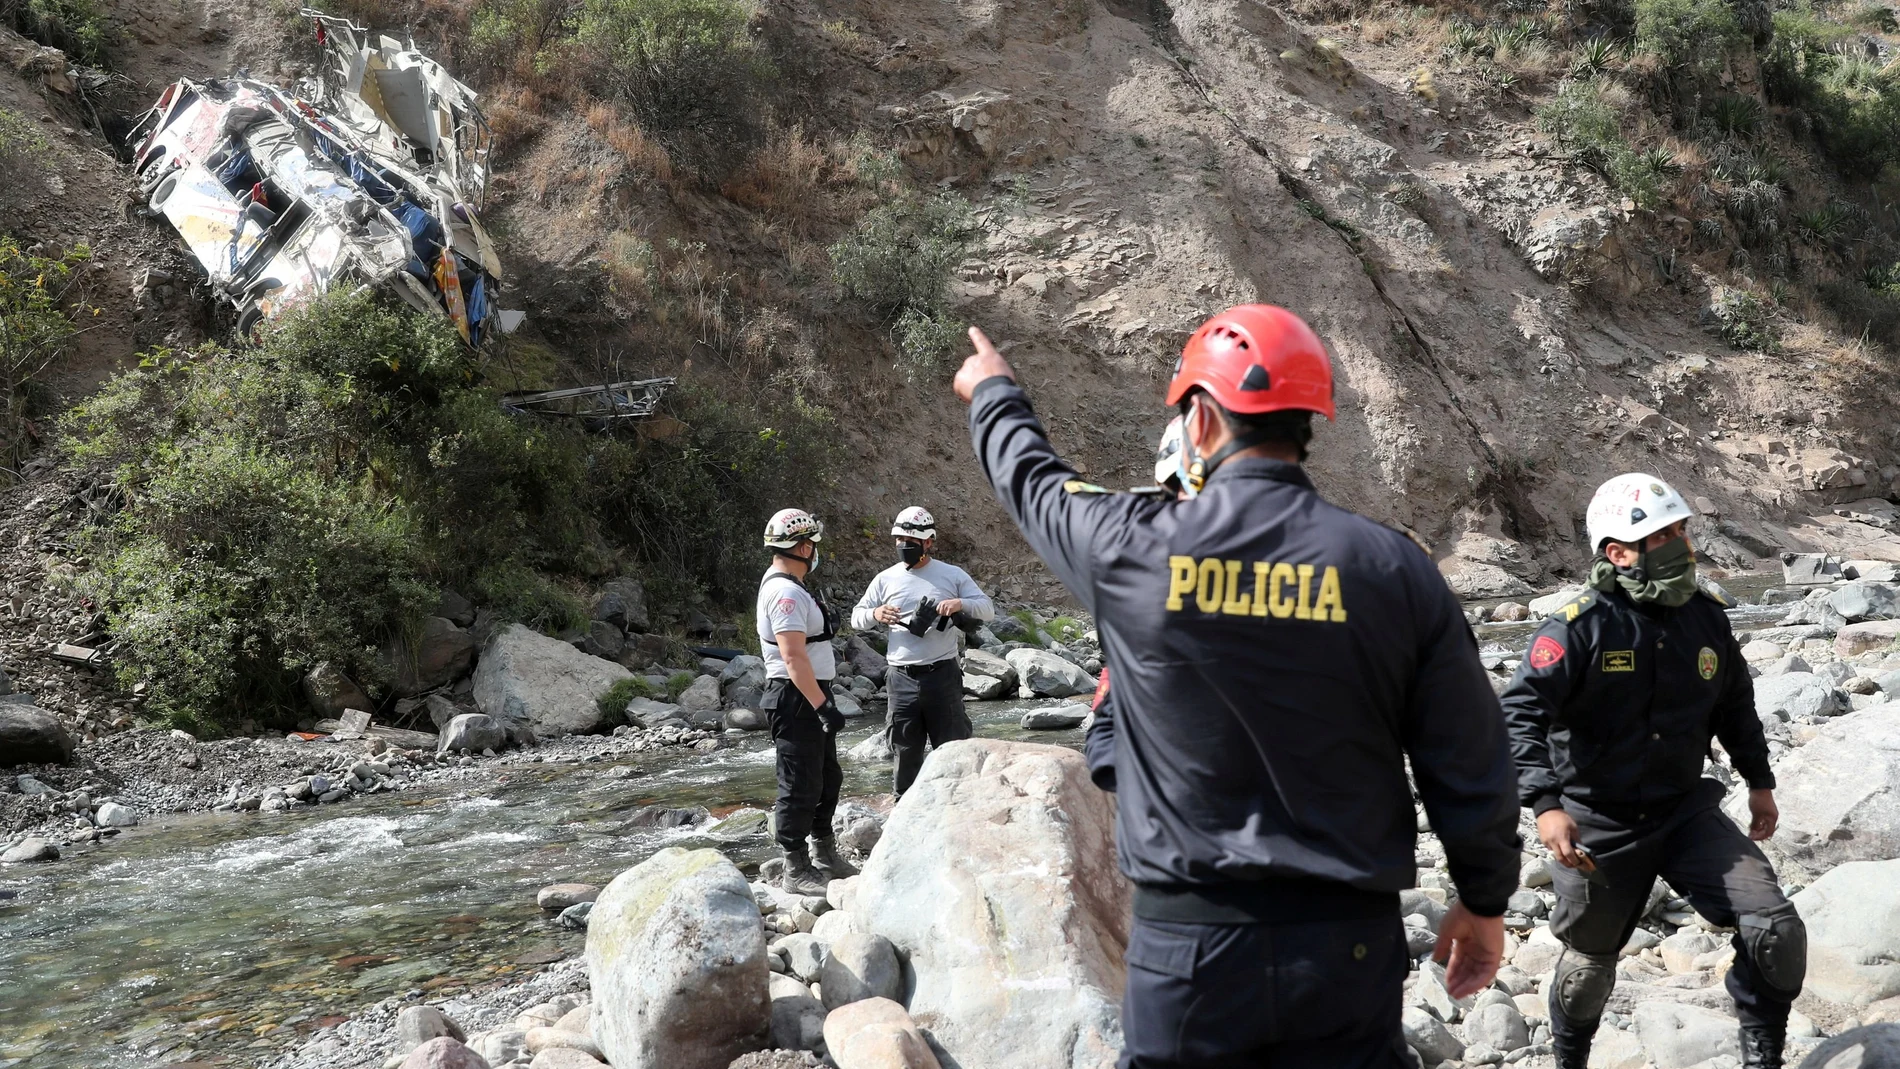 Rescue workers and police officers attend the place where a bus crashed, in Matucana, Peru, August 31, 2021. REUTERS/Sebastian Castaneda TPX IMAGES OF THE DAY